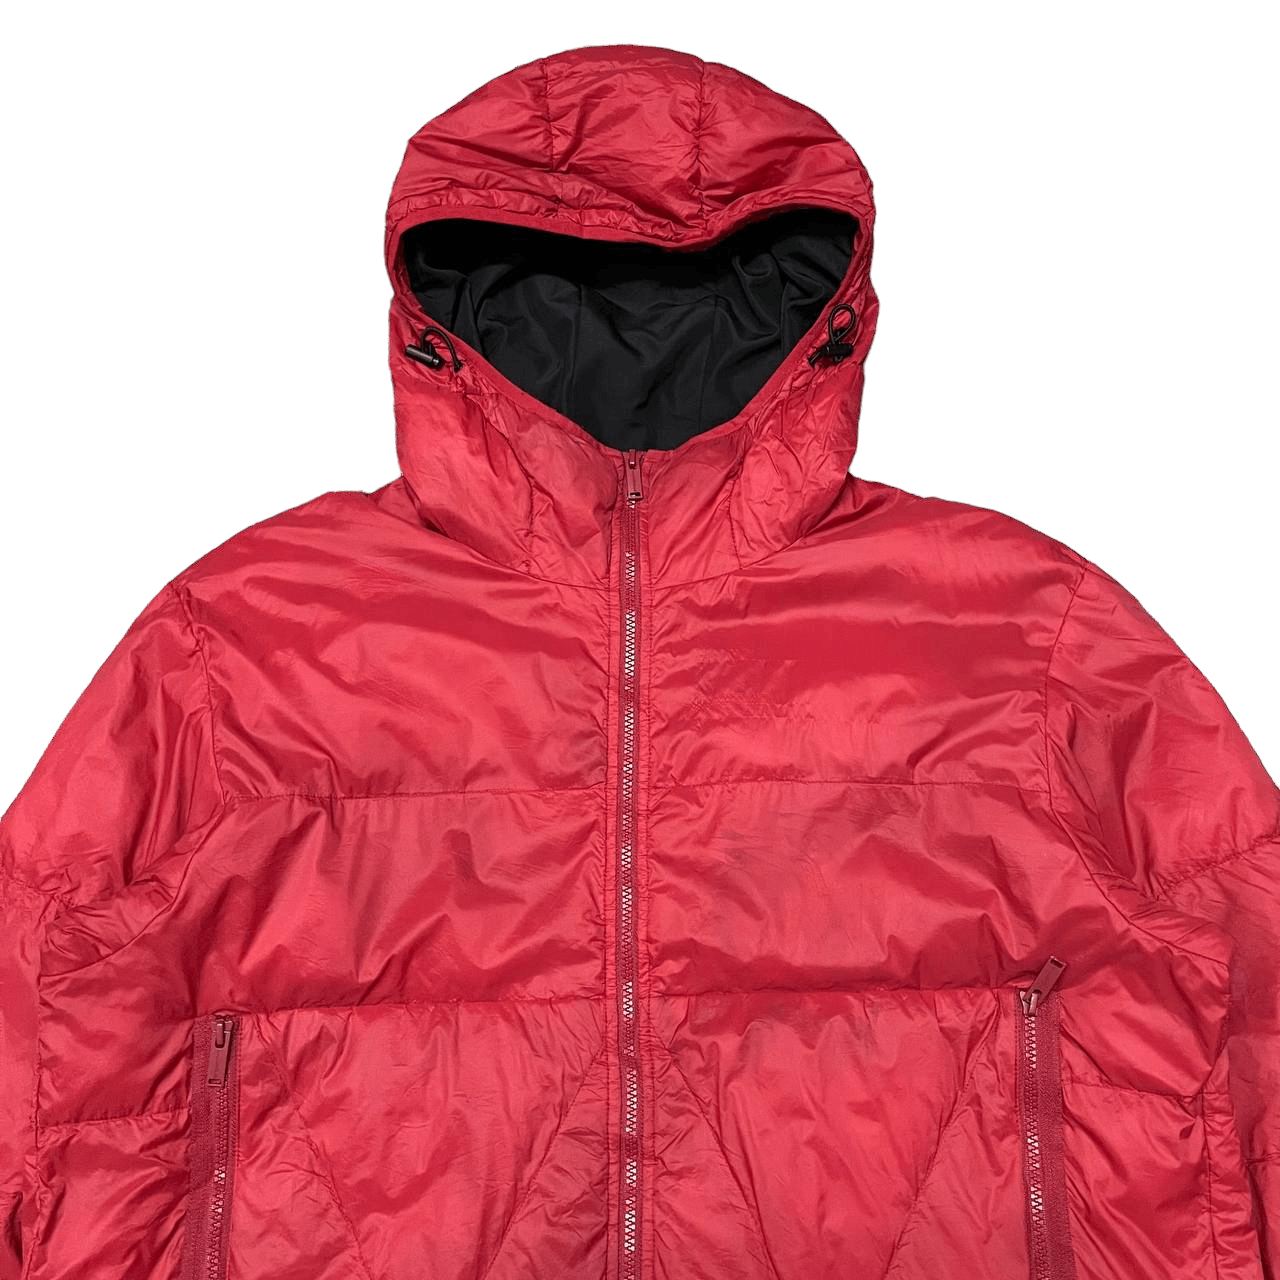 Undercover GU Padded Puffer Jacket Red XL - 3